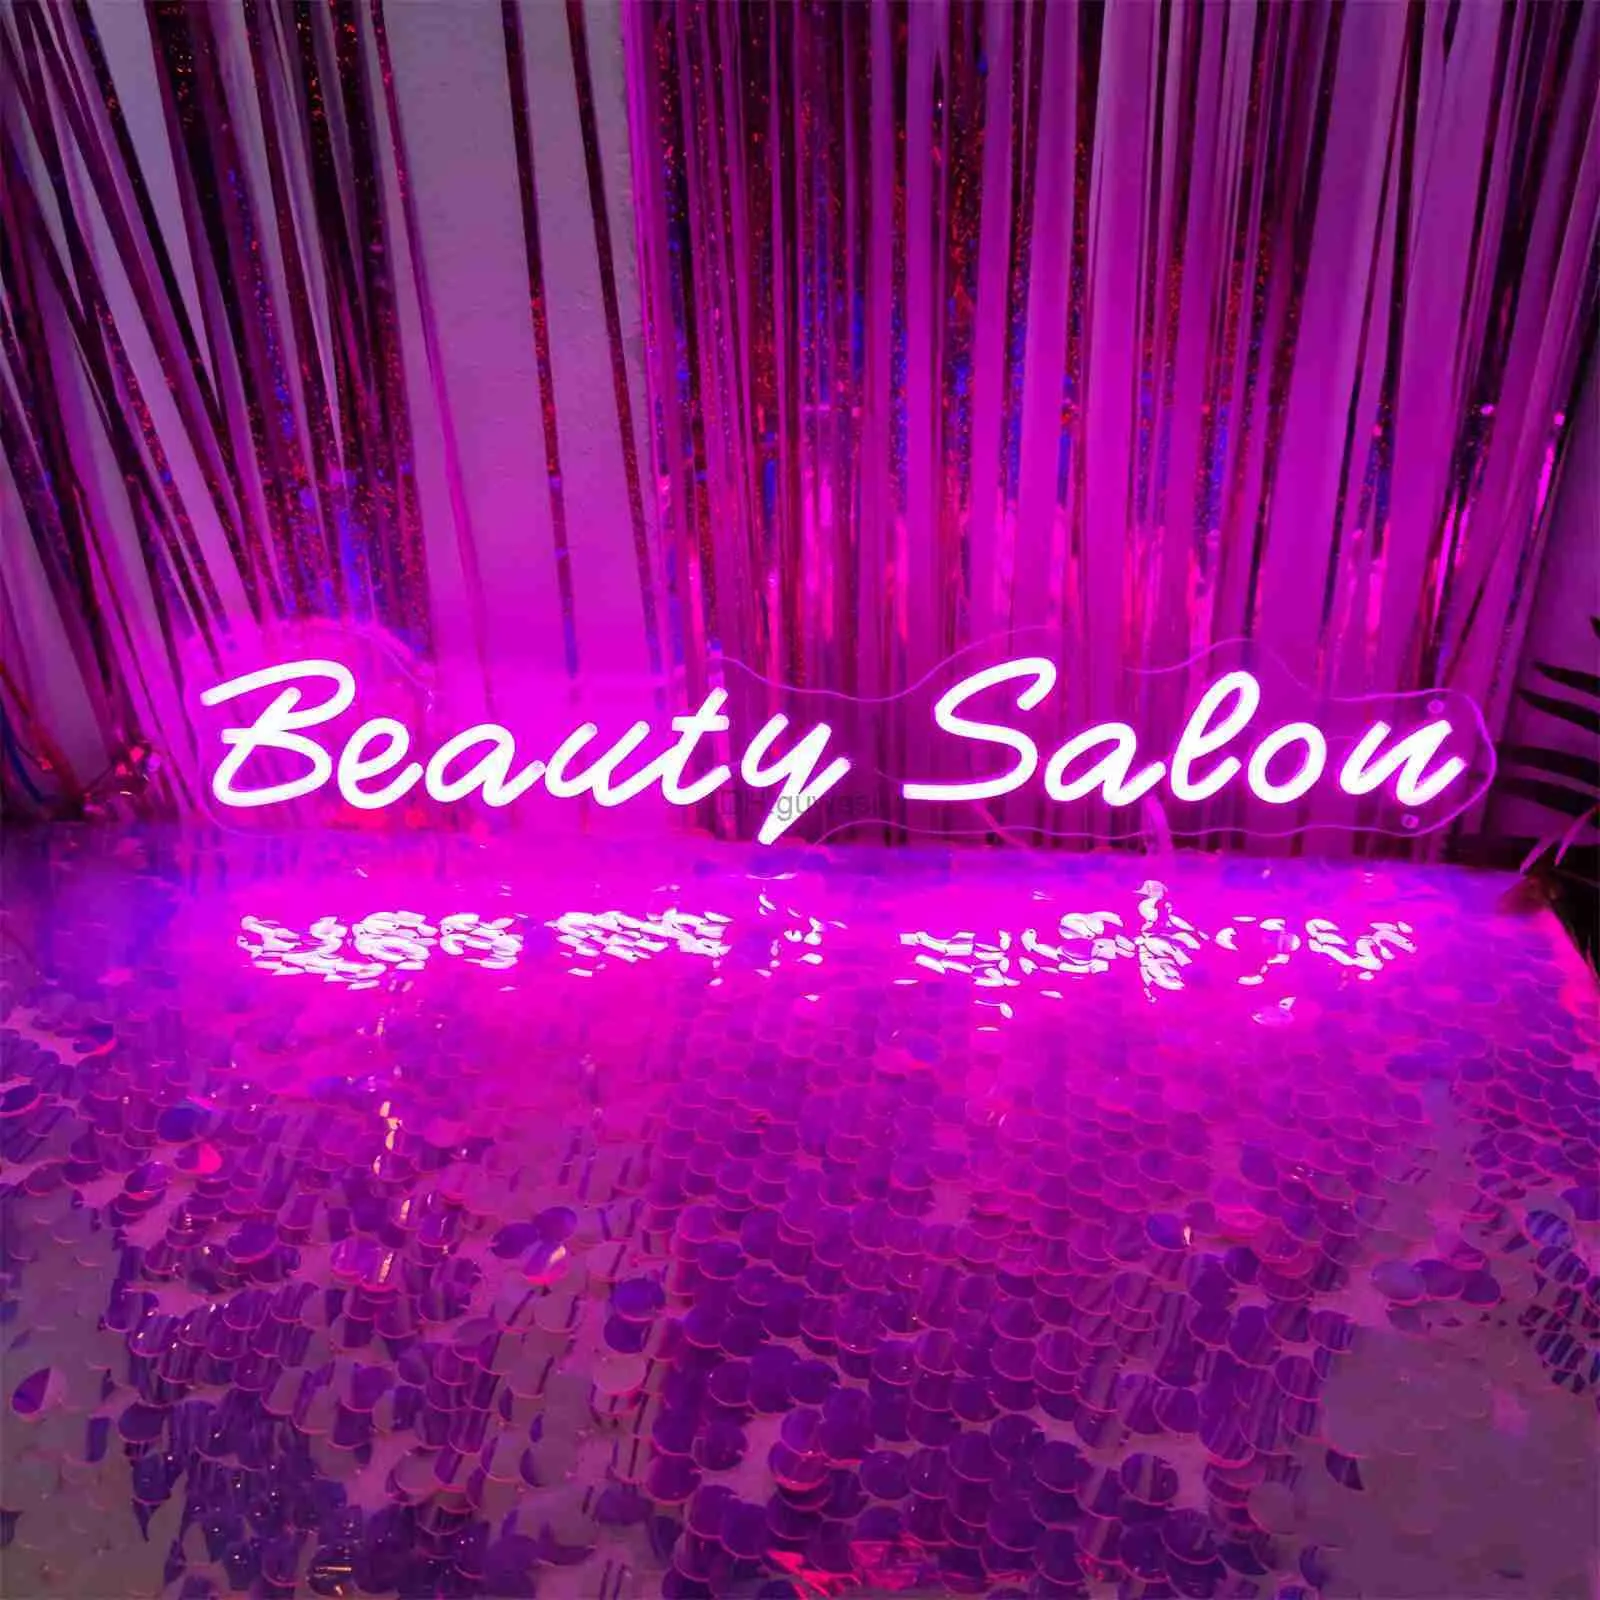 LED Neon Sign Beauty Salon LED Neon Lights Sign for Wall Room Decor Salon Studio Bedroom Decoration Hanging Business Neon Led Signs Night Lamp YQ240126